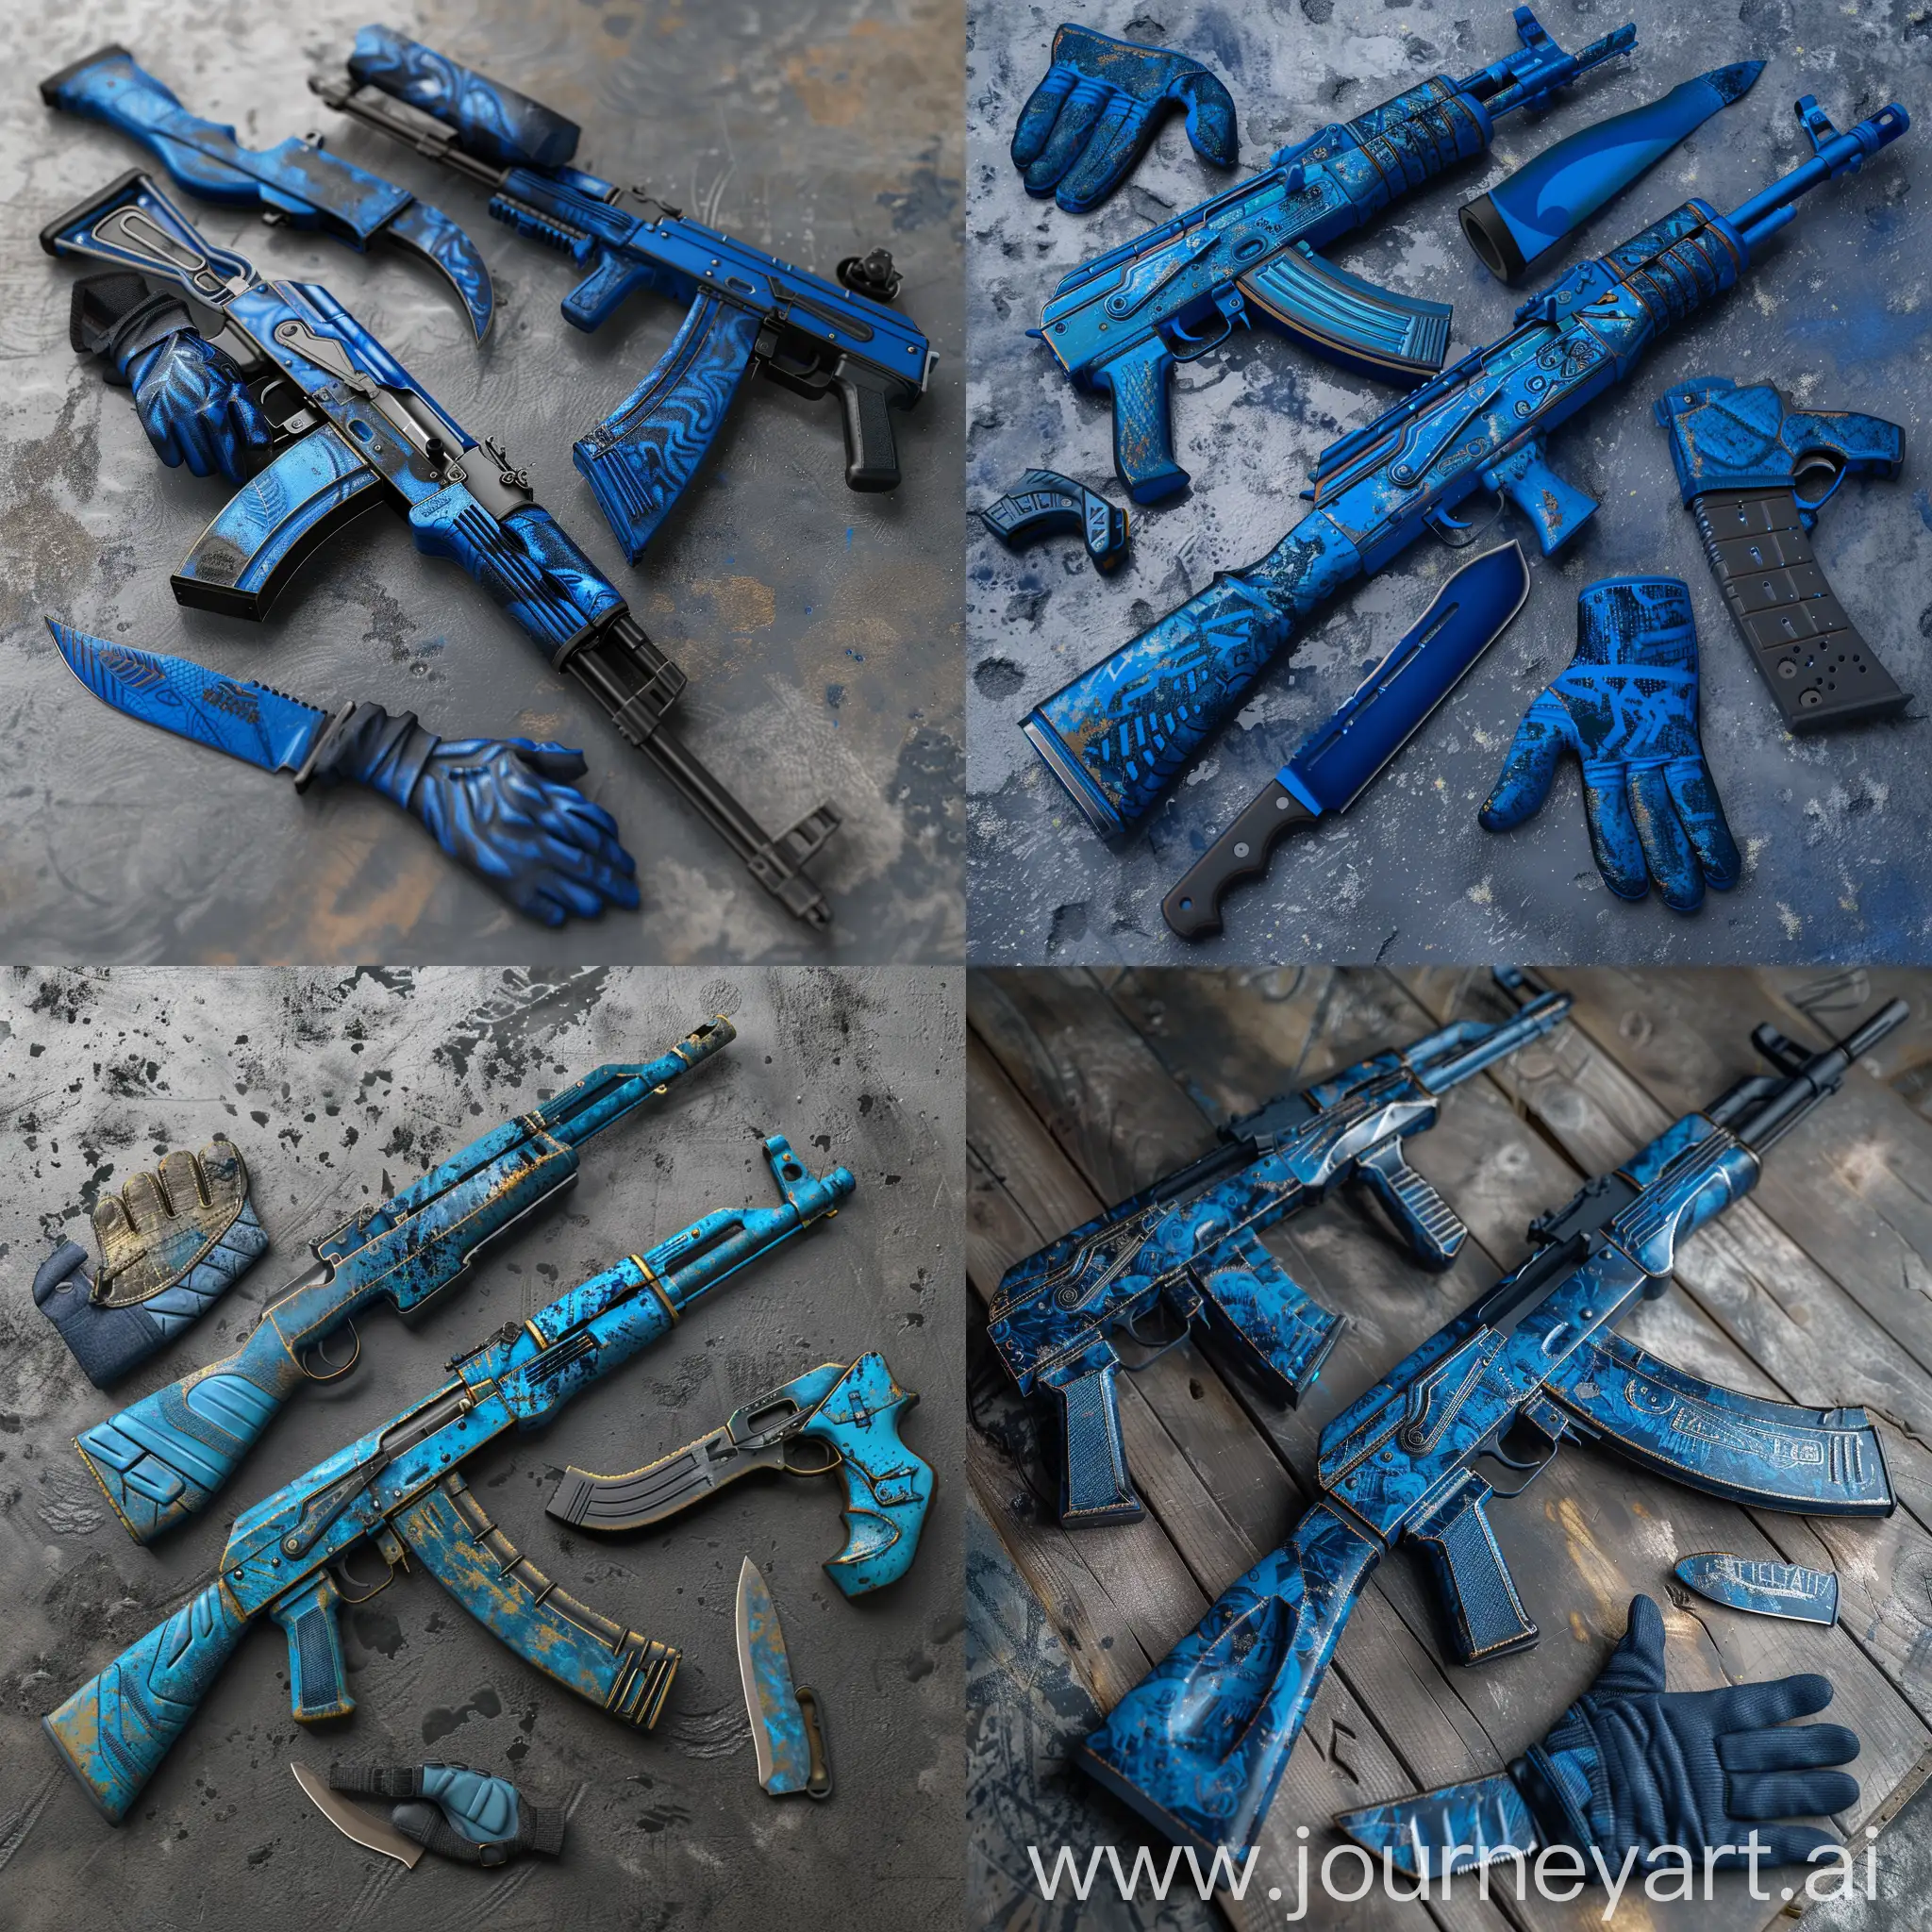 CS-GO-Blue-Theme-Perfect-Skins-for-AK47-Deagle-Knife-and-Glove-Weapons